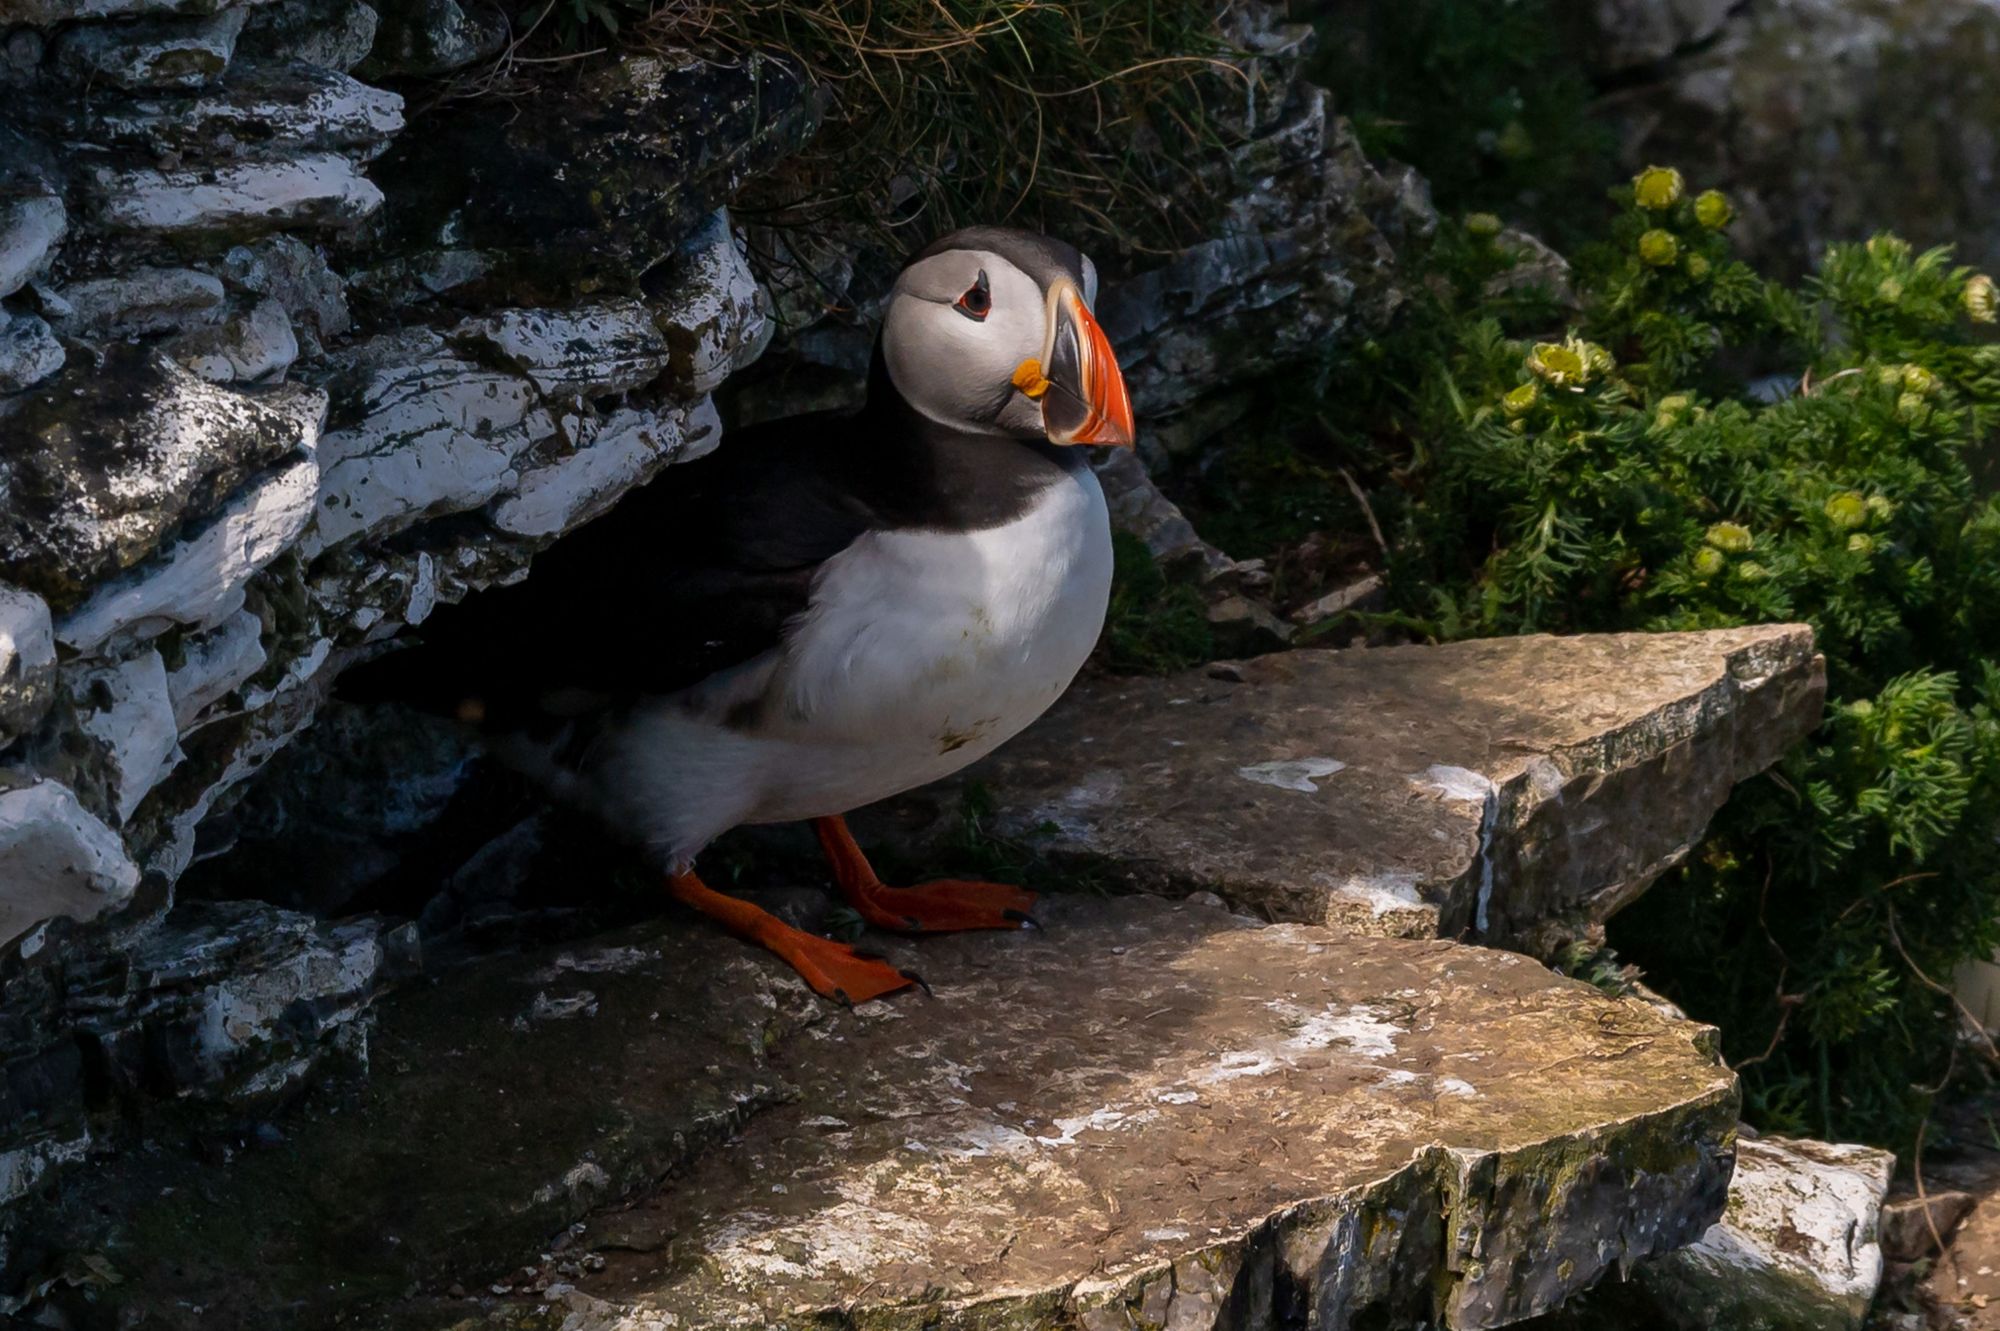 Climate change and overfishing means that puffins are finding it increasingly difficult to find the sand eels they rely on for food. Photo: Getty